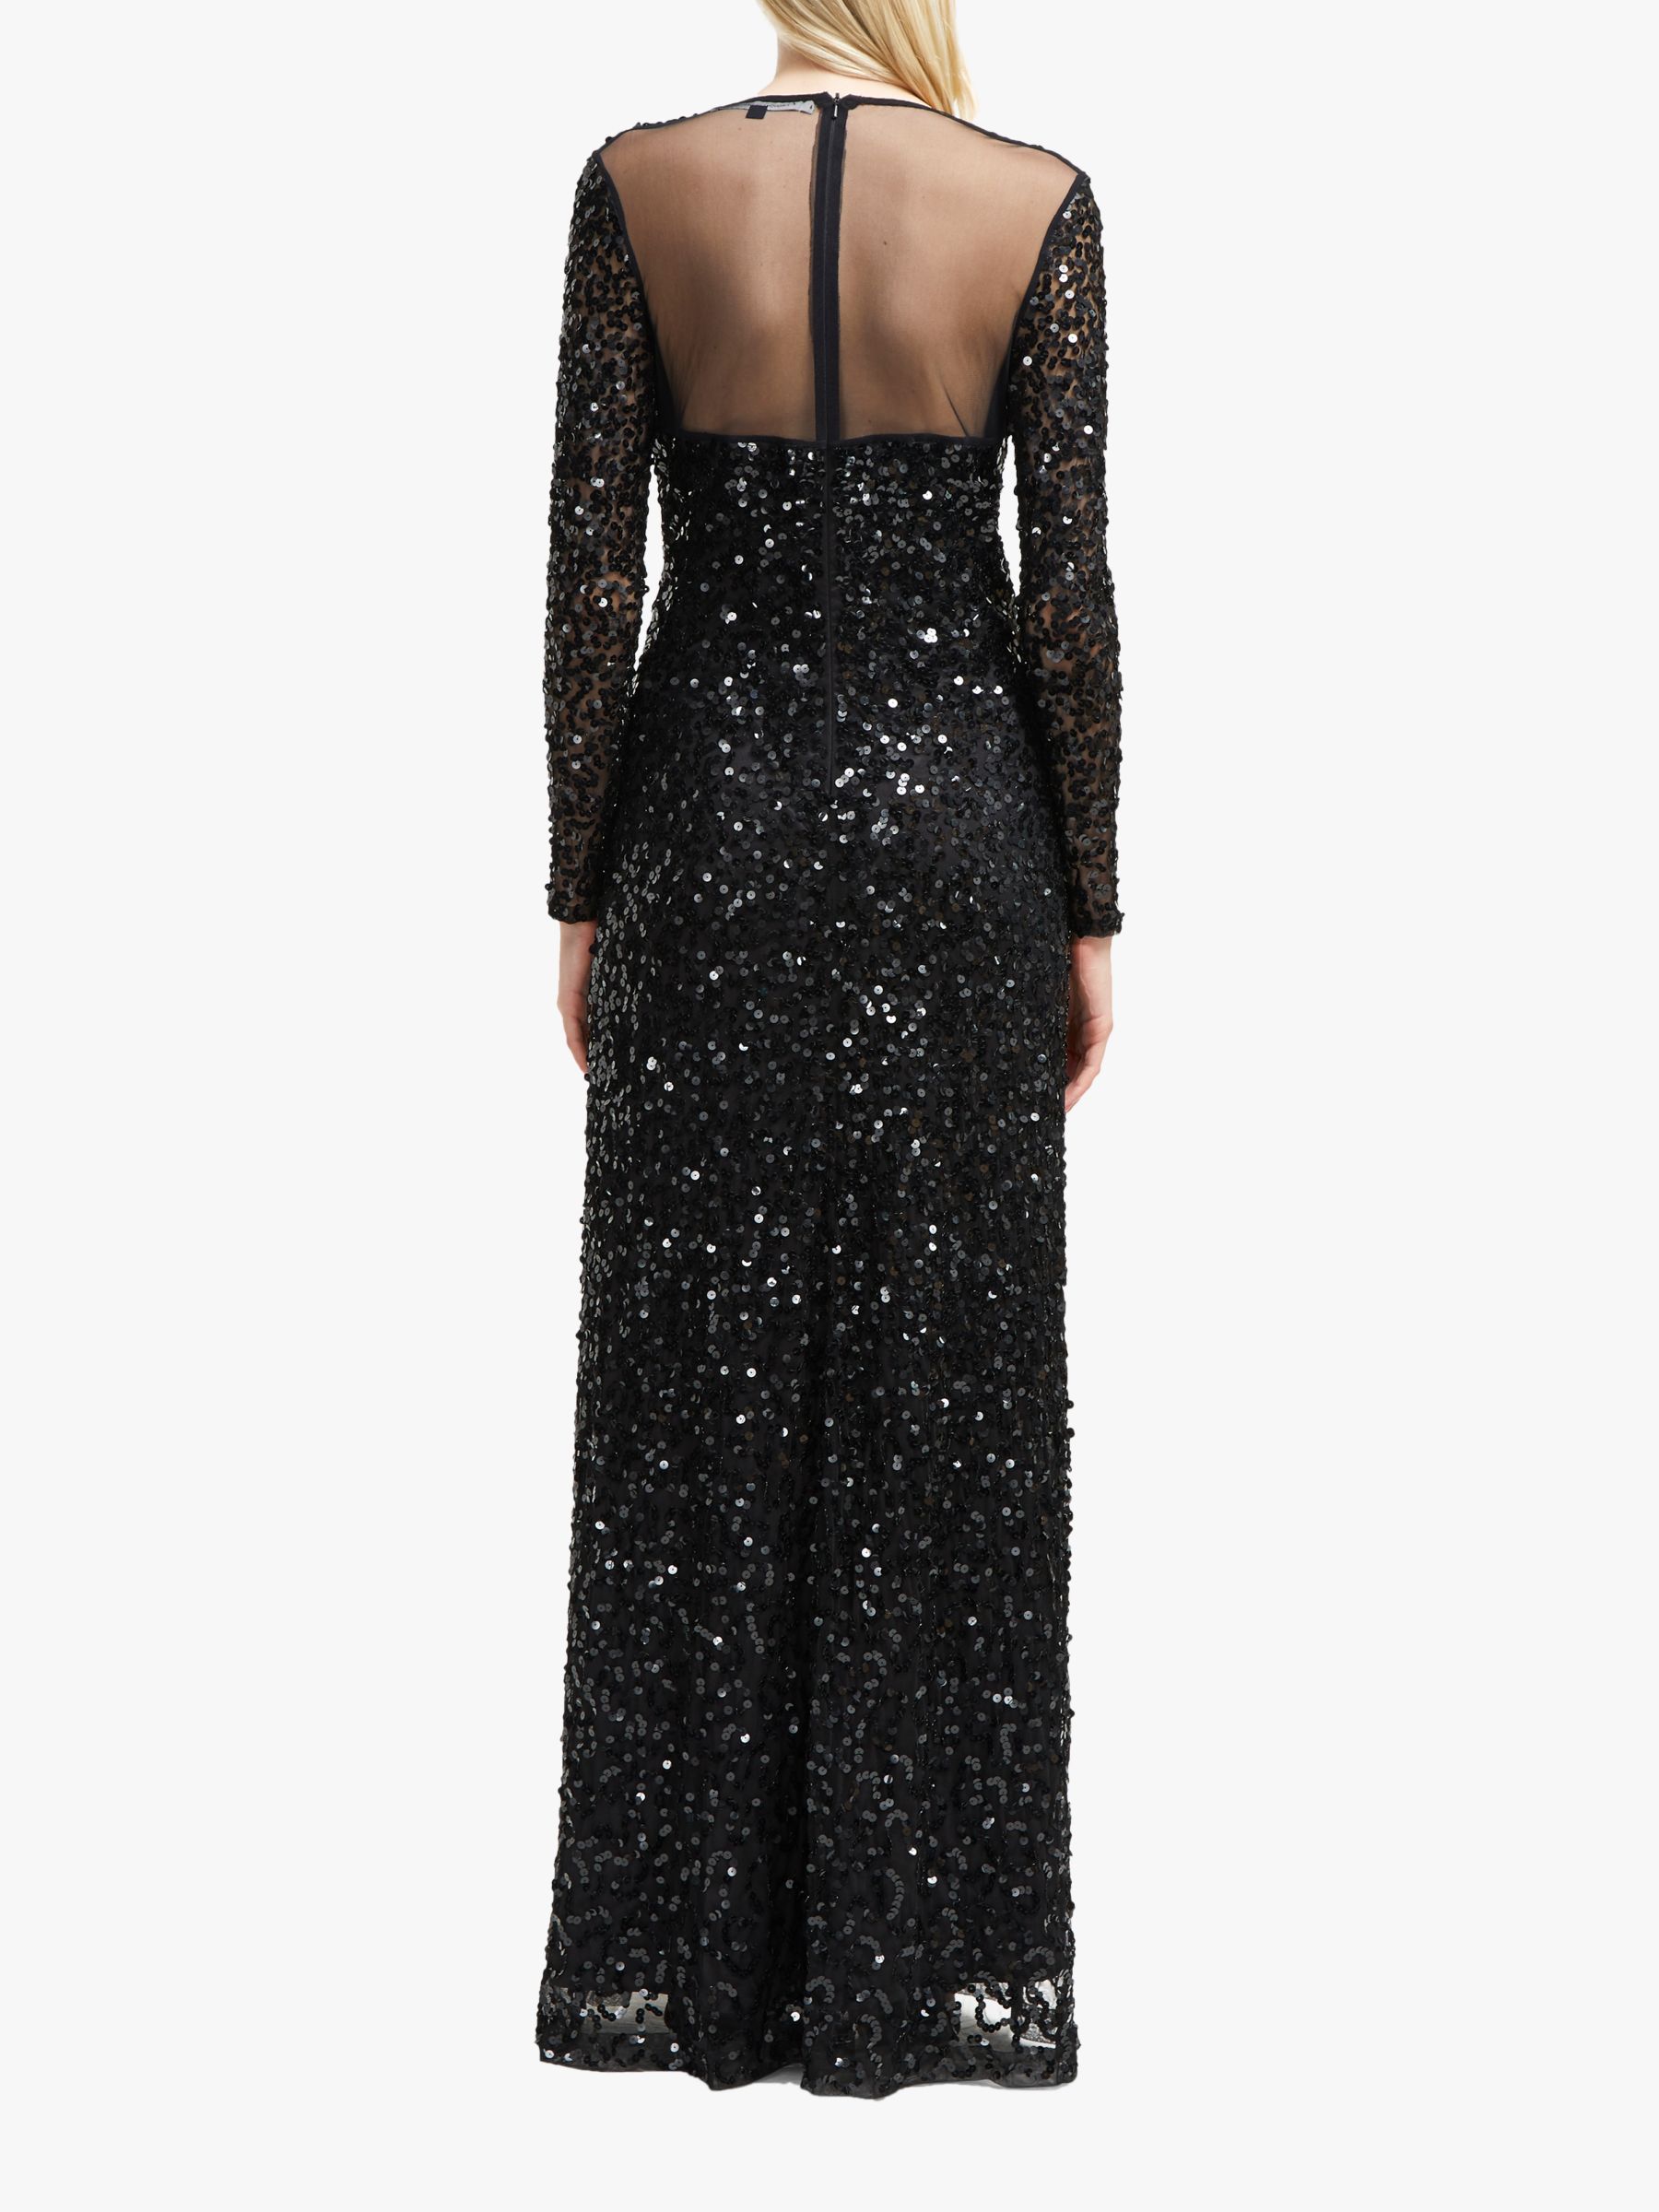 French Connection Helena Sequin V-Neck Maxi Dress, Black